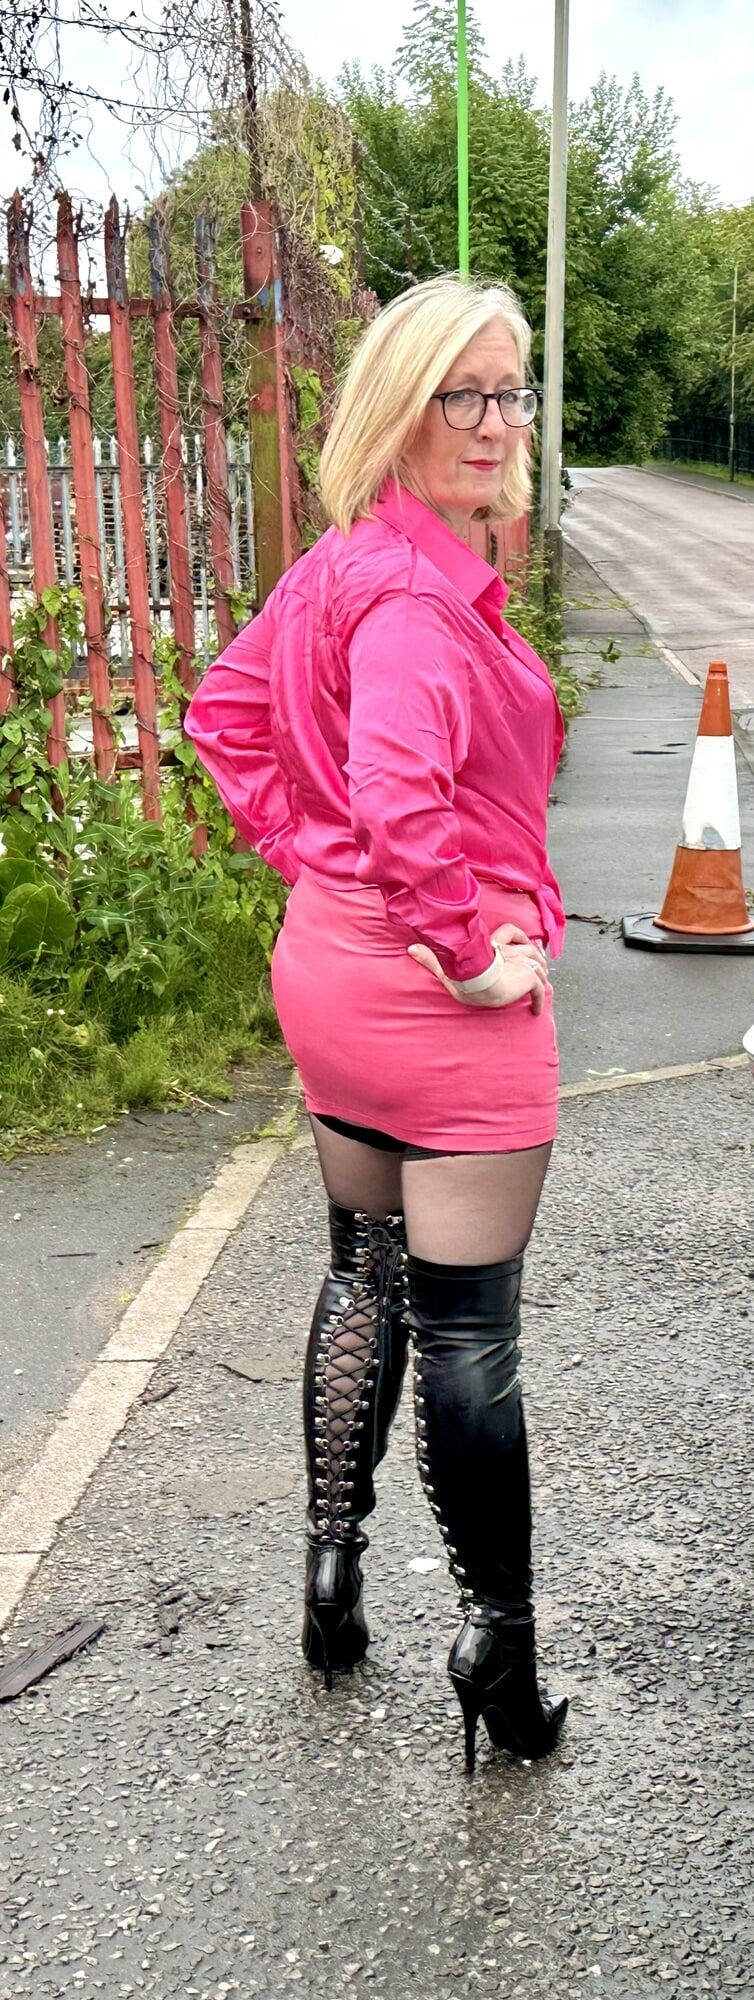 Katie in the pink 2 #6